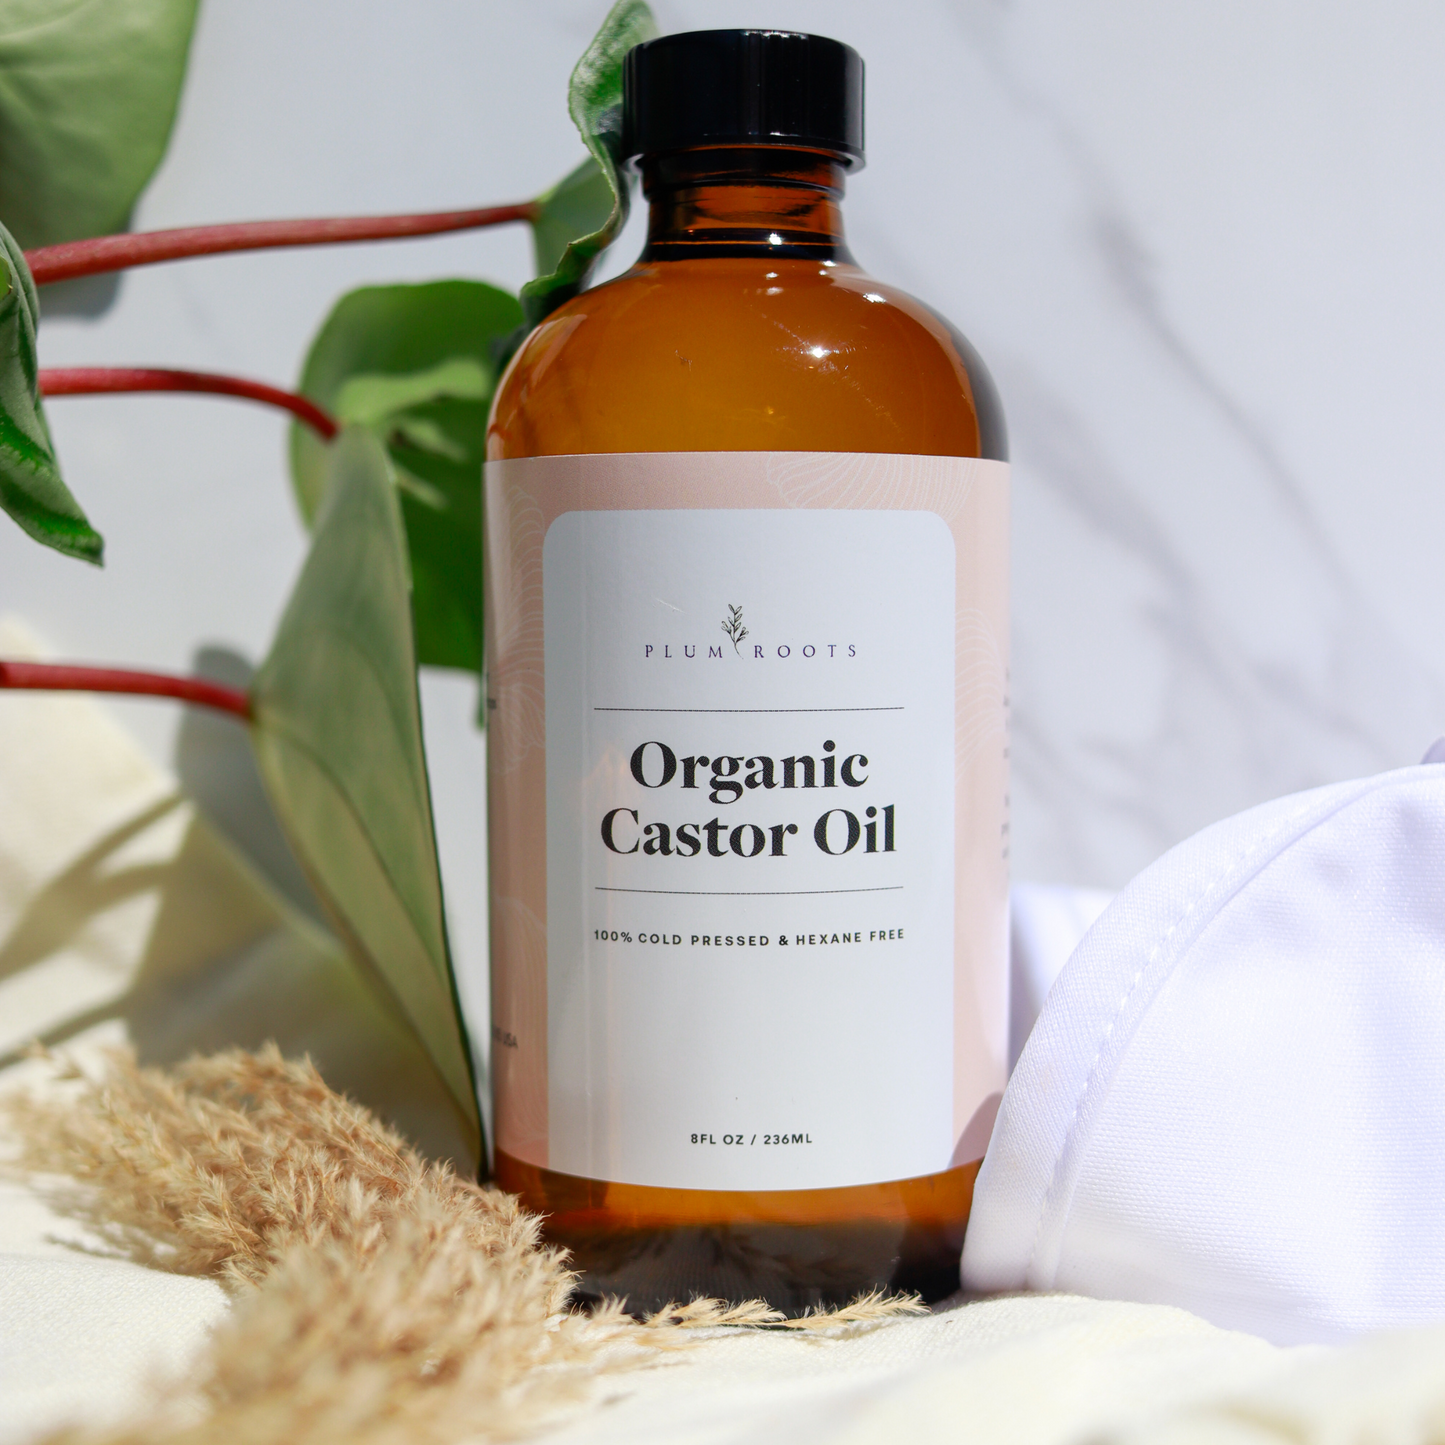 Organic Cold Pressed, Hexane Free Castor Oil in a amber glass bottle